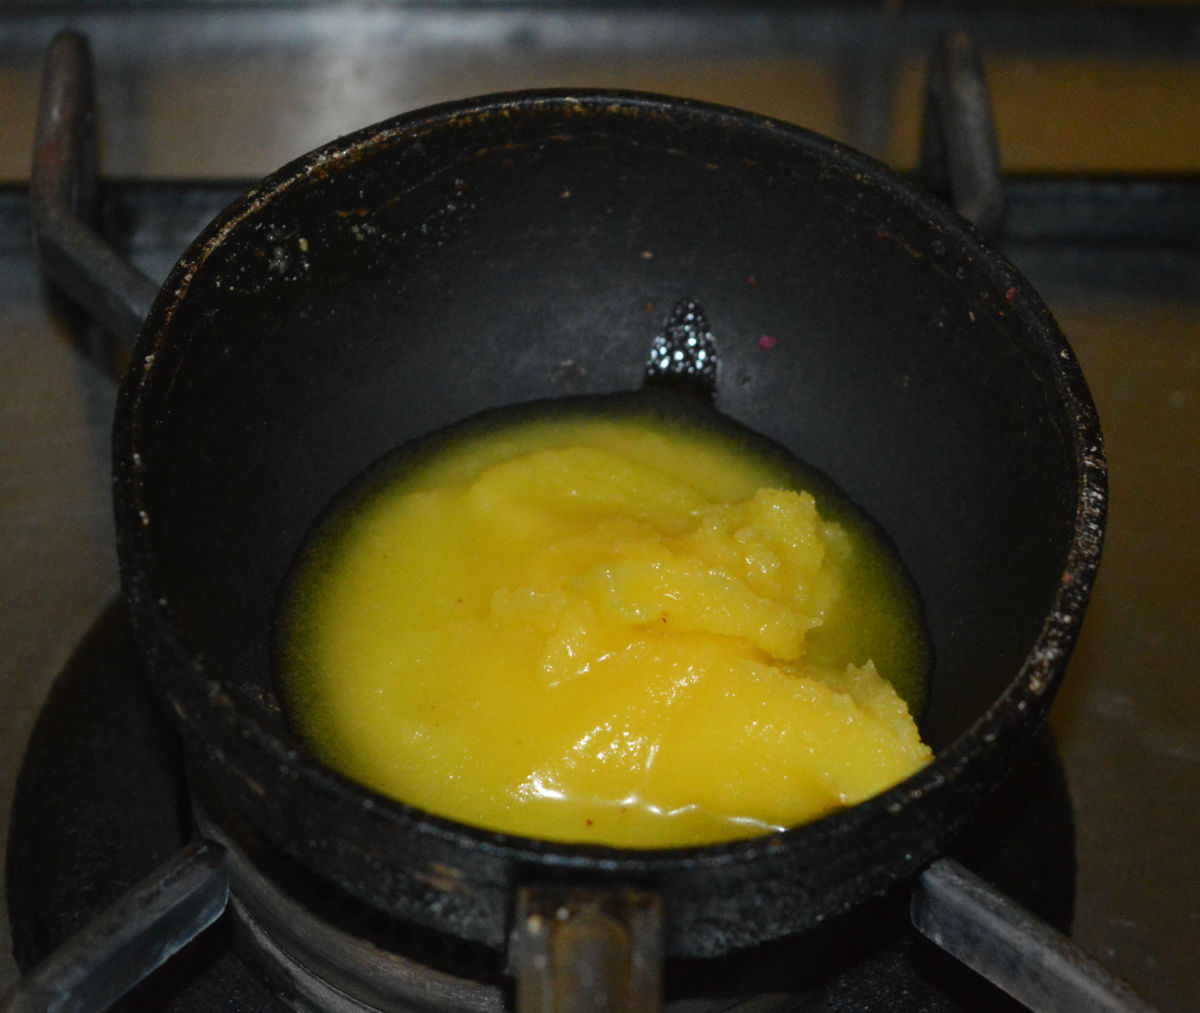 Step one: Melt the ghee and make it very hot. Turn off the heat.